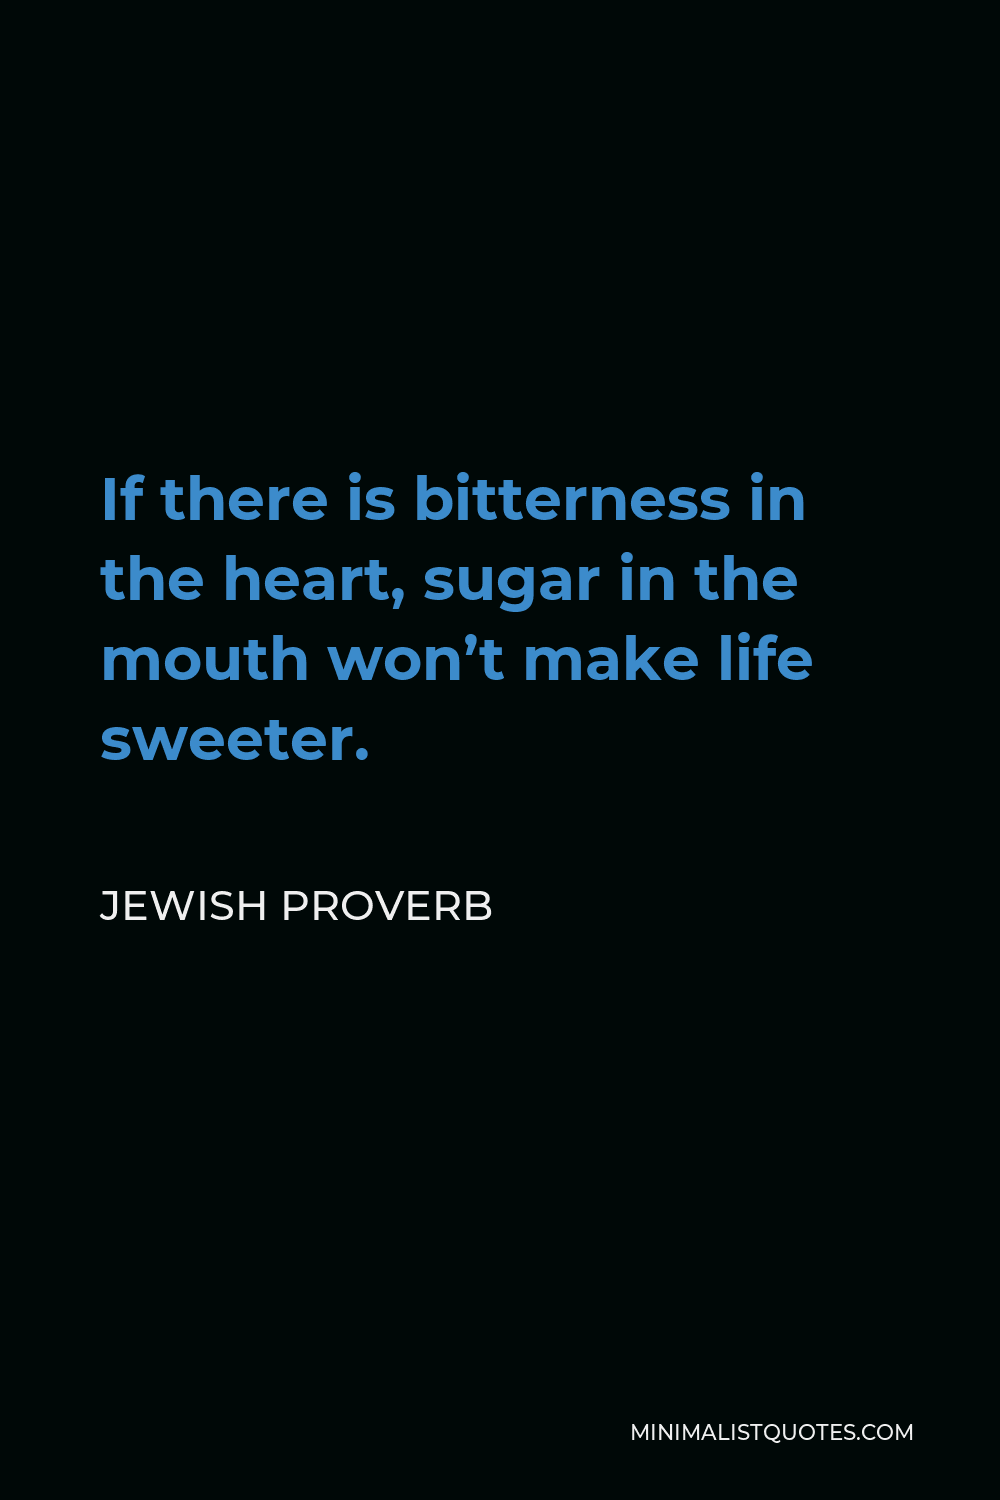 Jewish Proverb Quote - If there is bitterness in the heart, sugar in the mouth won’t make life sweeter.